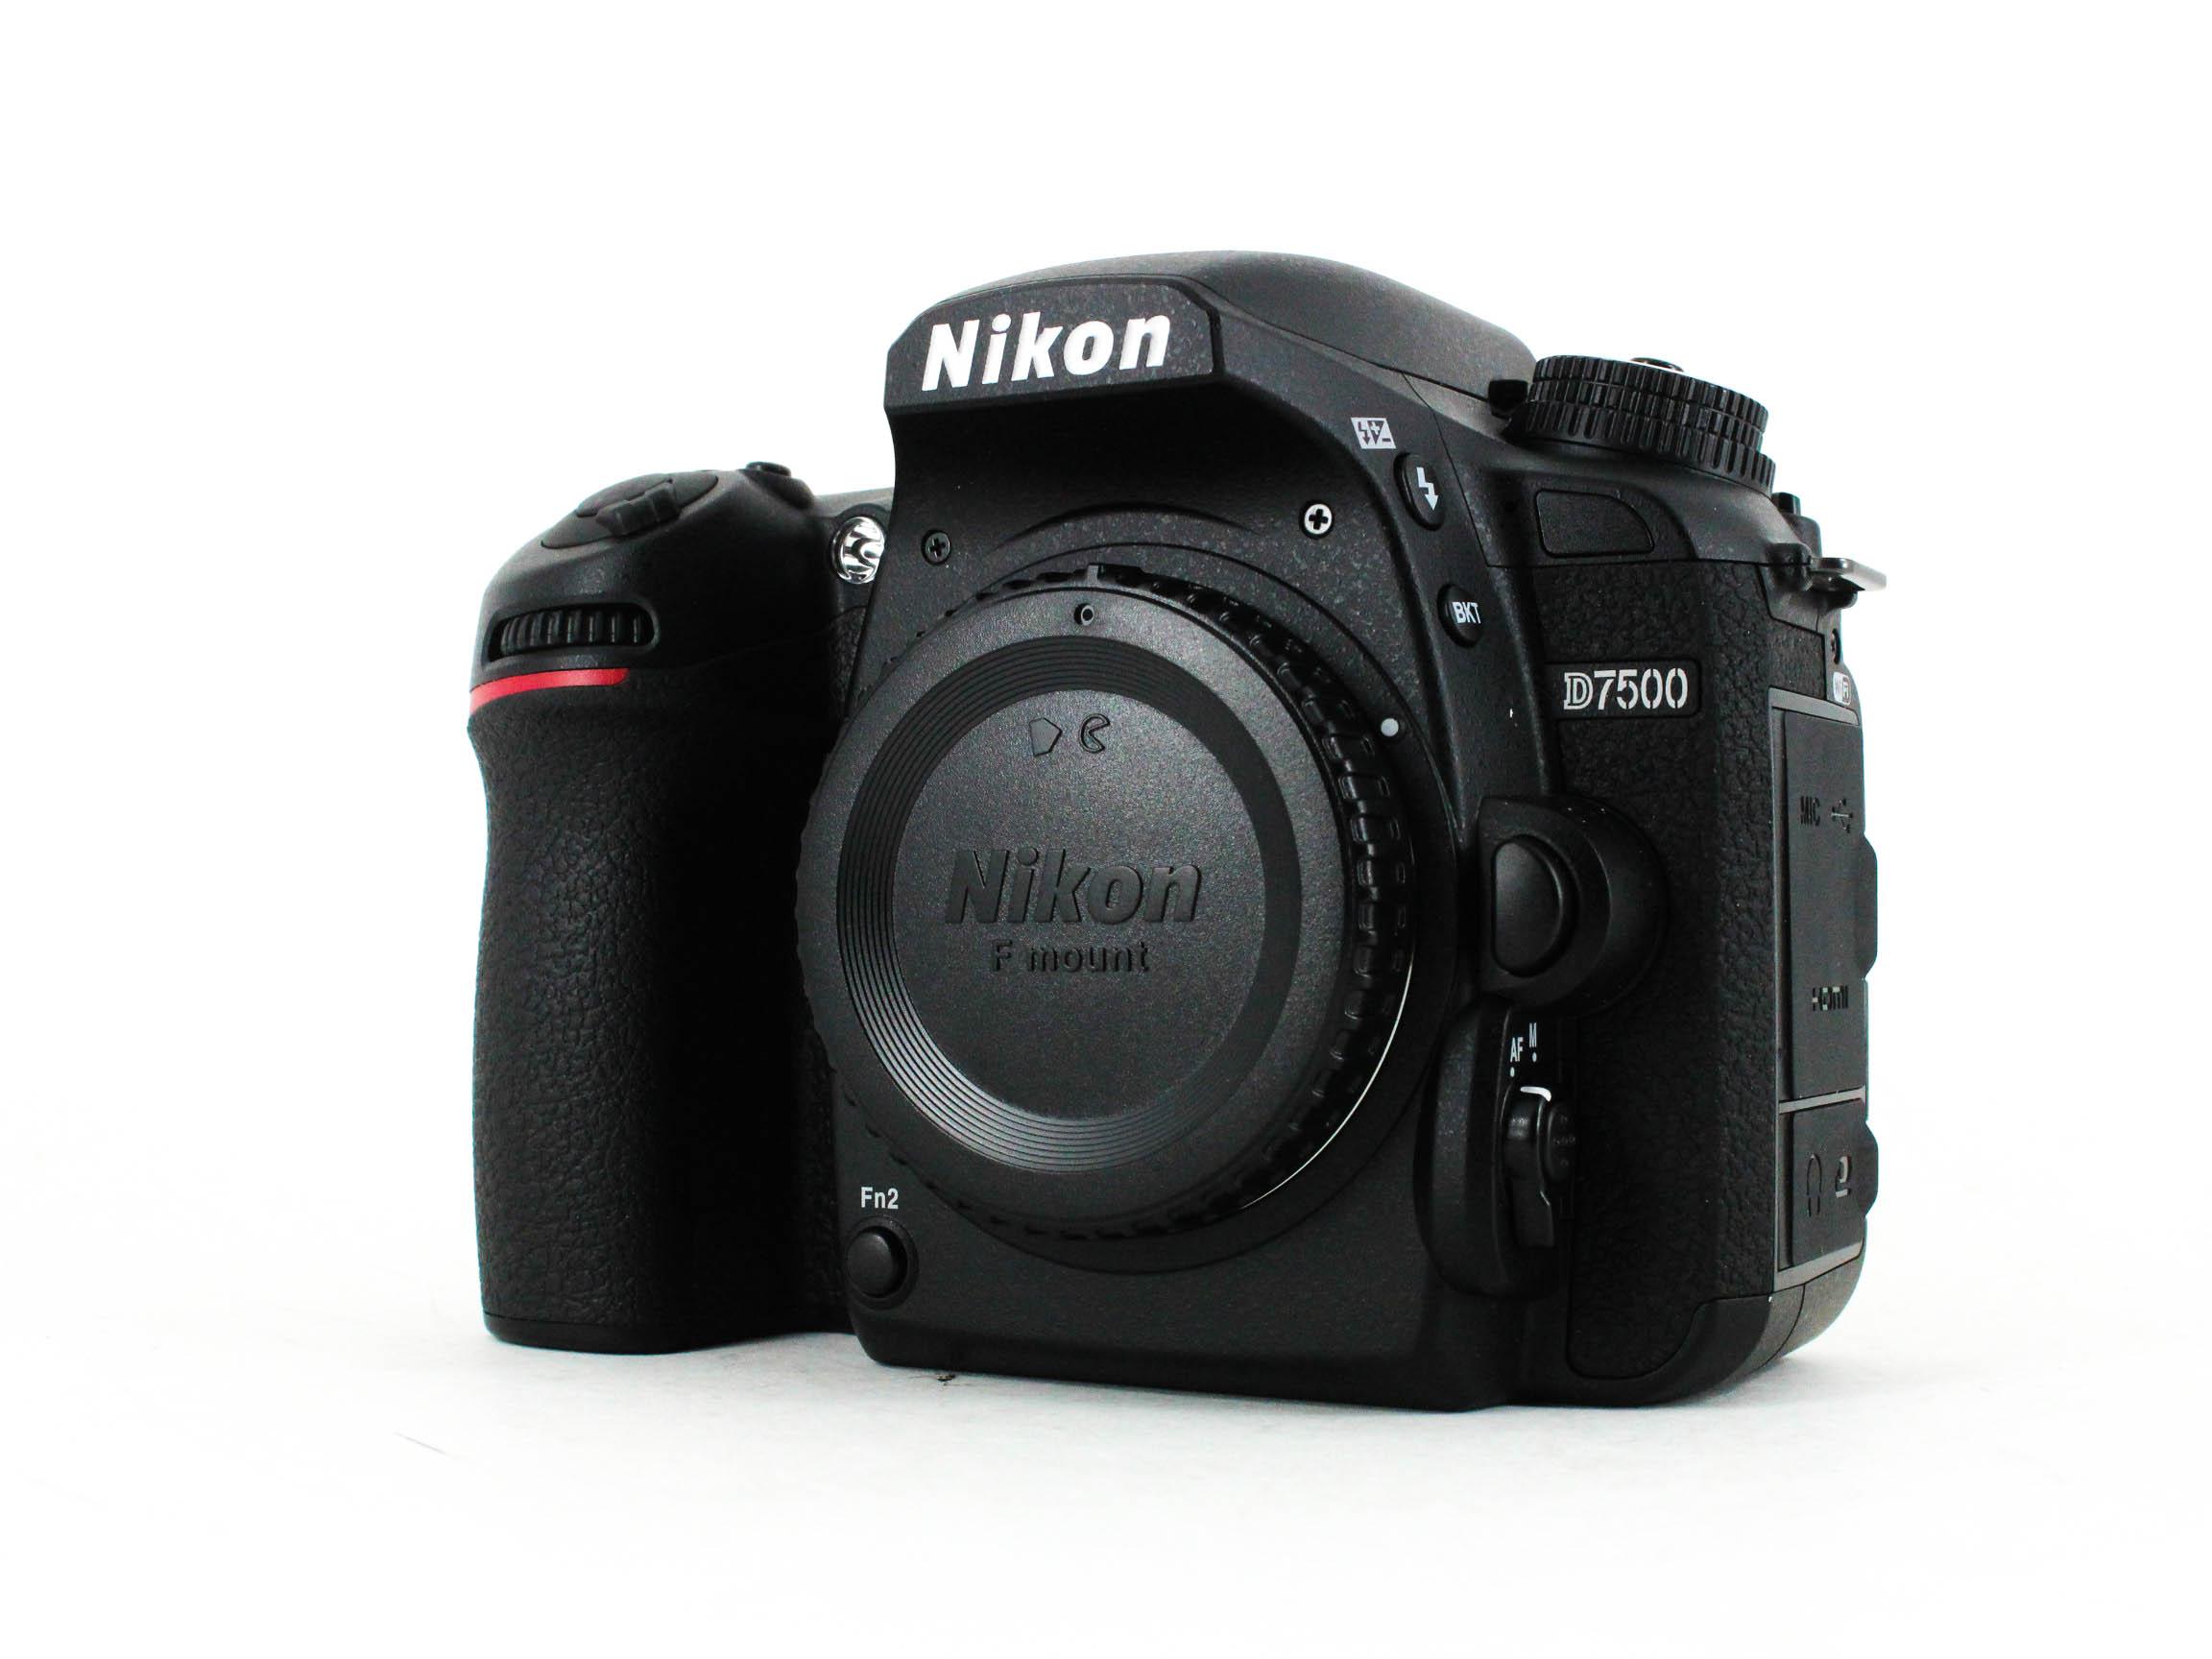 Nikon d7500 d7200 - Is d7500 Really that much